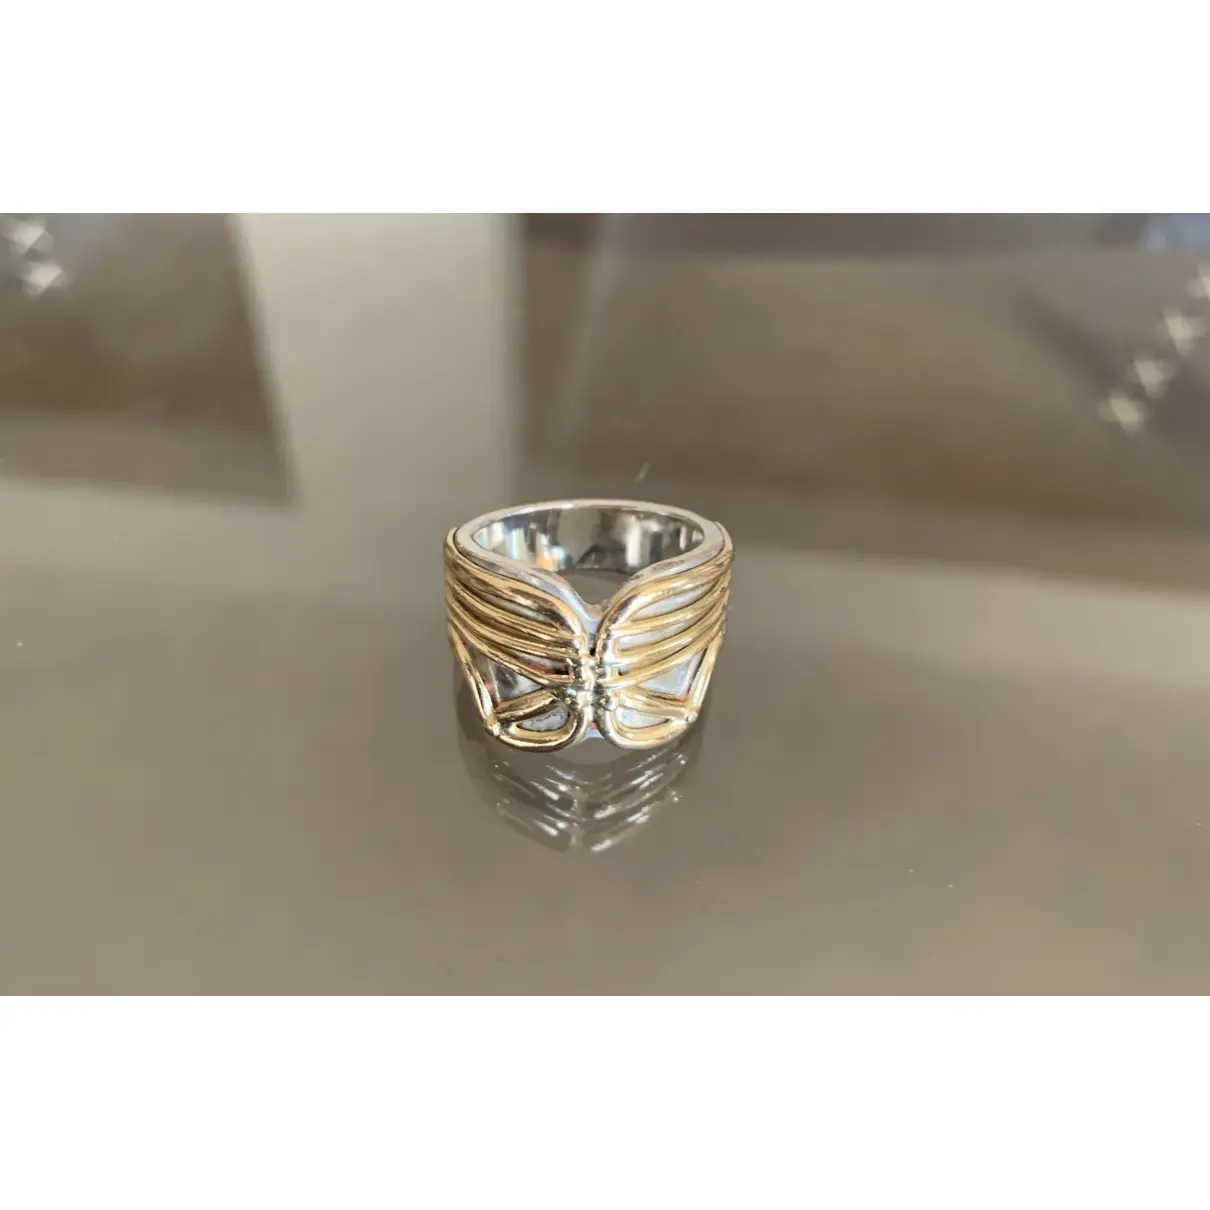 Buy Ilias Lalaounis Silver ring online